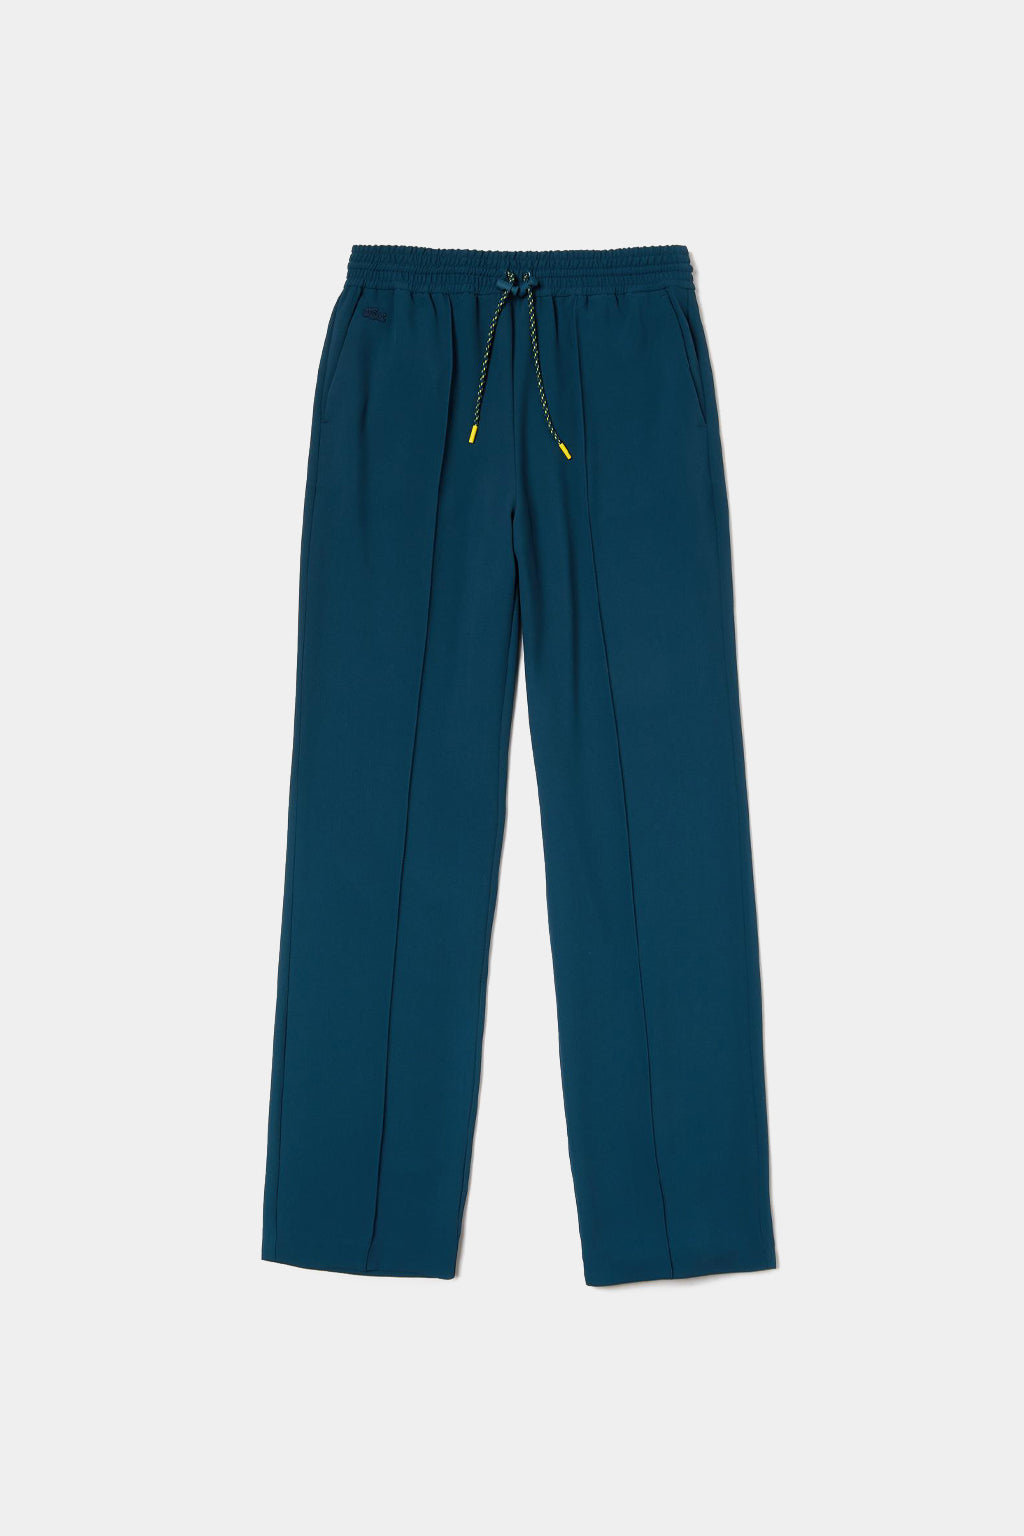 Lacoste - Wide Pleated Track Pants